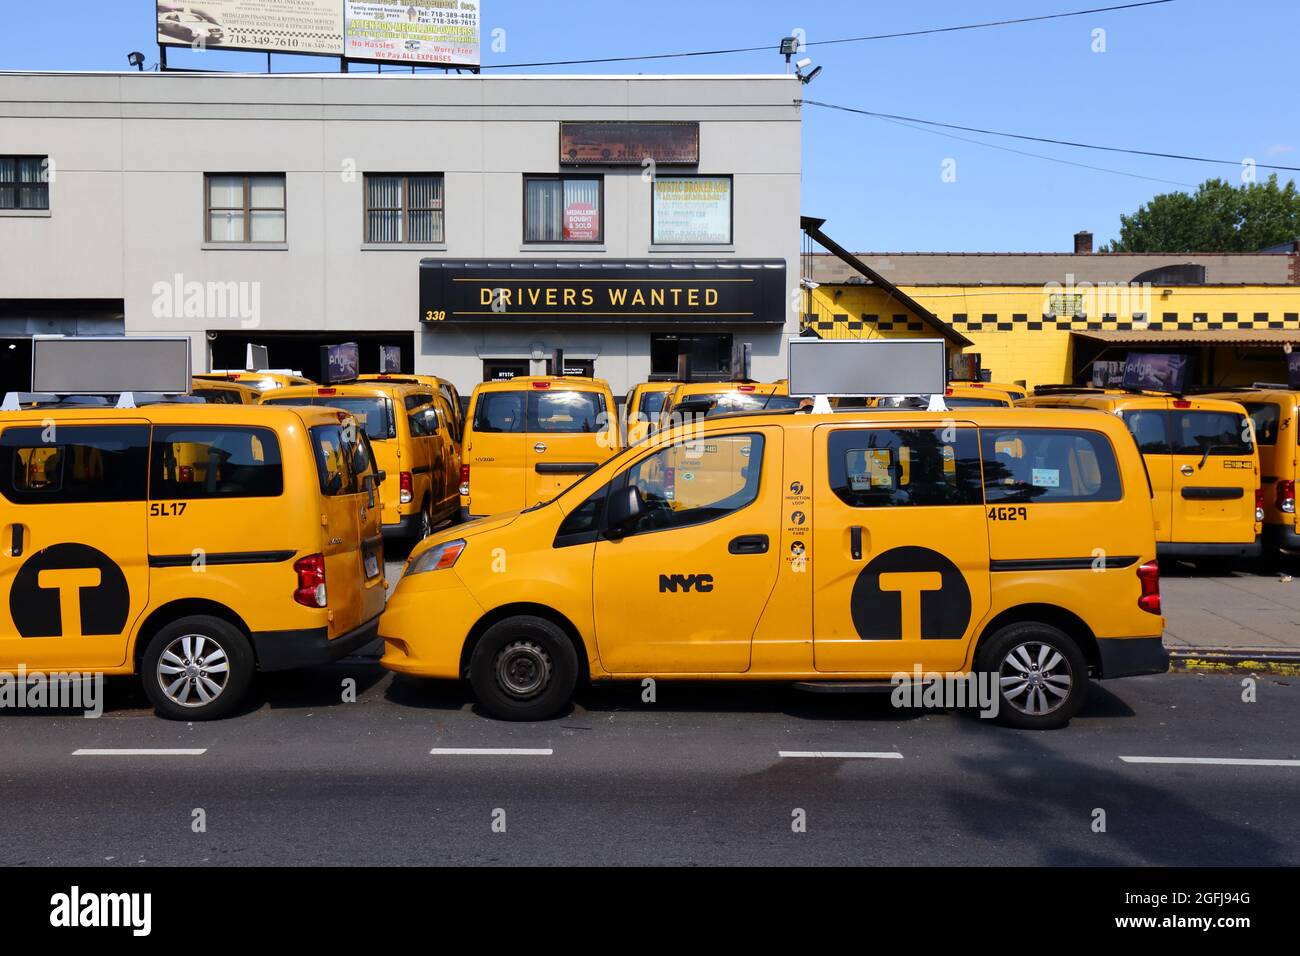 NYC Taxi cabs parked at a taxi garage along McGuinness Blvd in Greenpoint, Brooklyn with a 'Drivers Wanted' sign in the background. July 31, 2021. Stock Photo